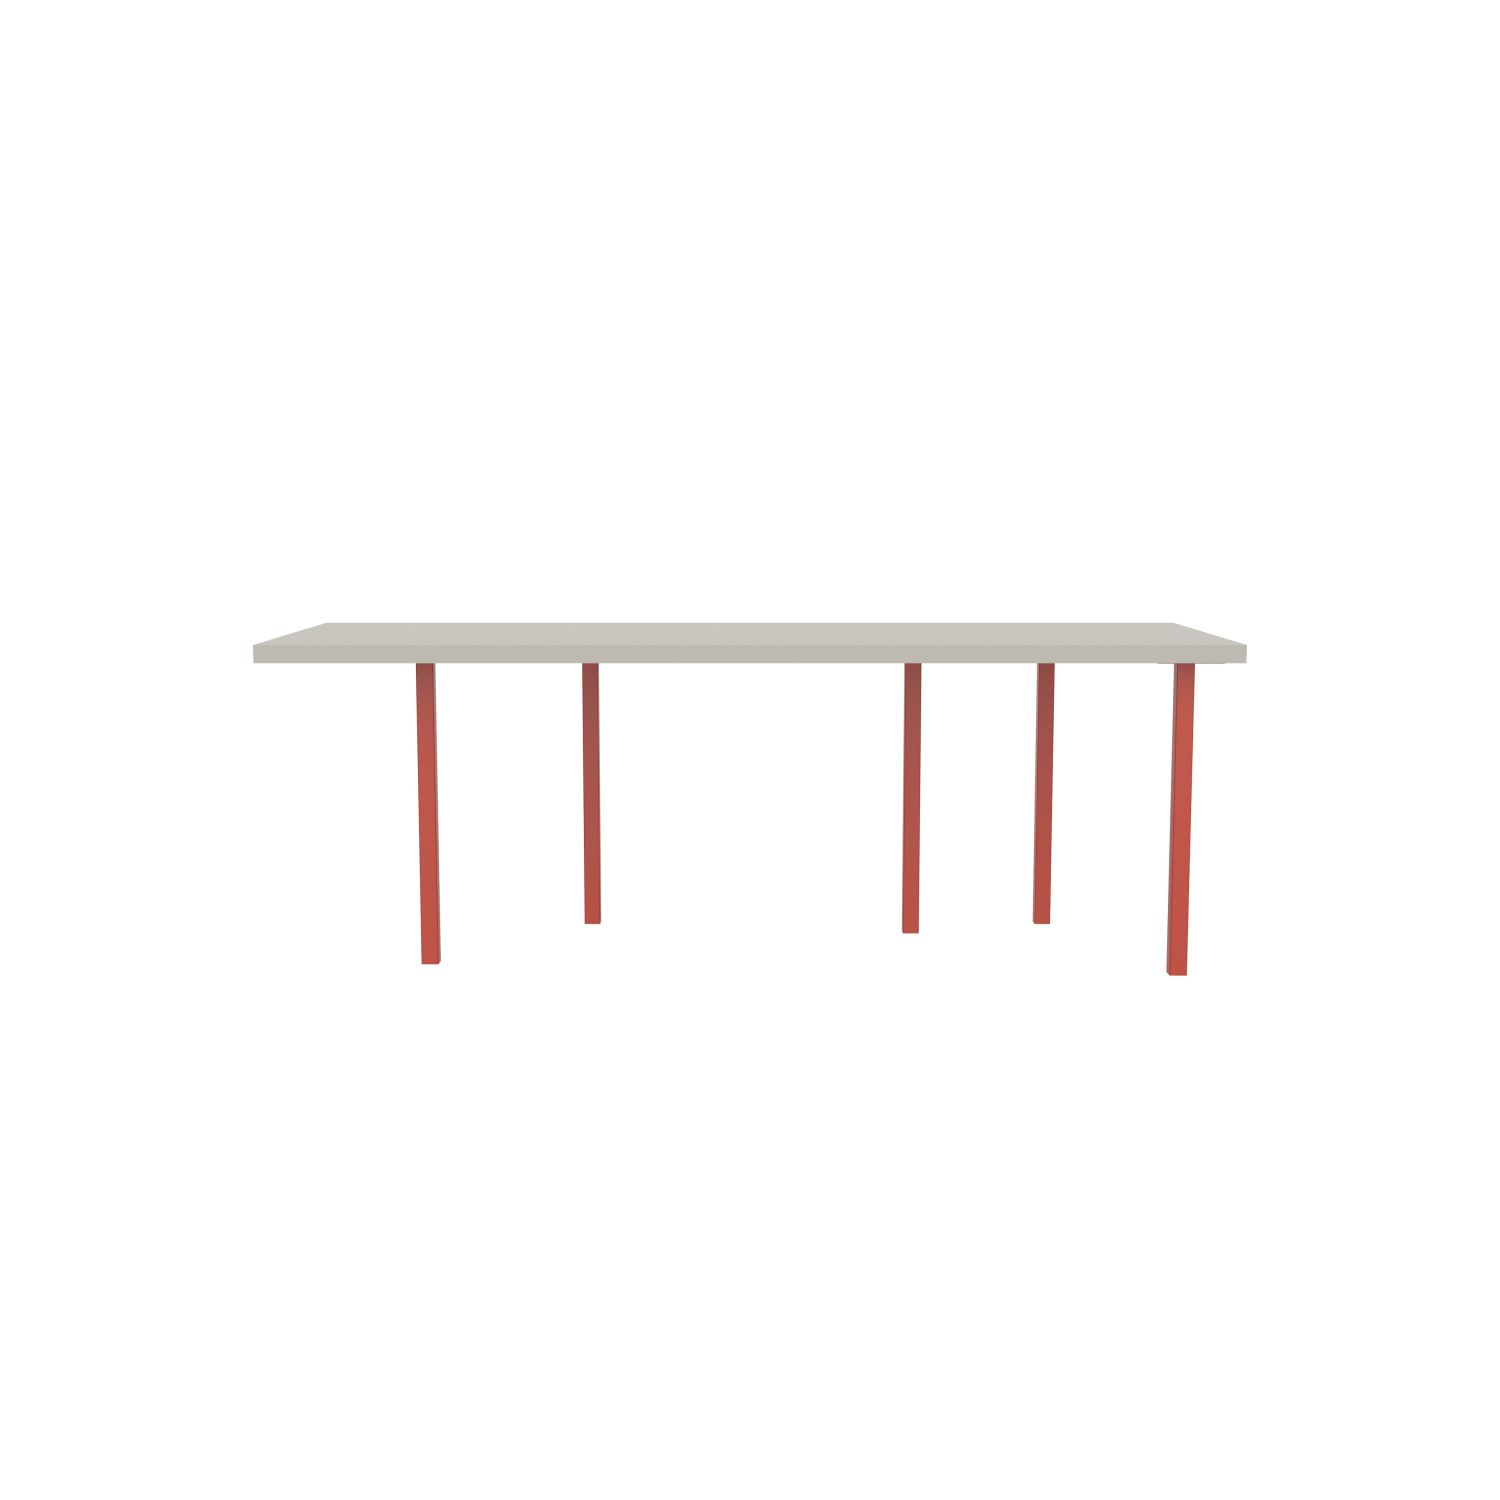 lensvelt bbrand table five fixed heigt 80x218 hpl white 50 mm price level 1 vermilion red ral2002